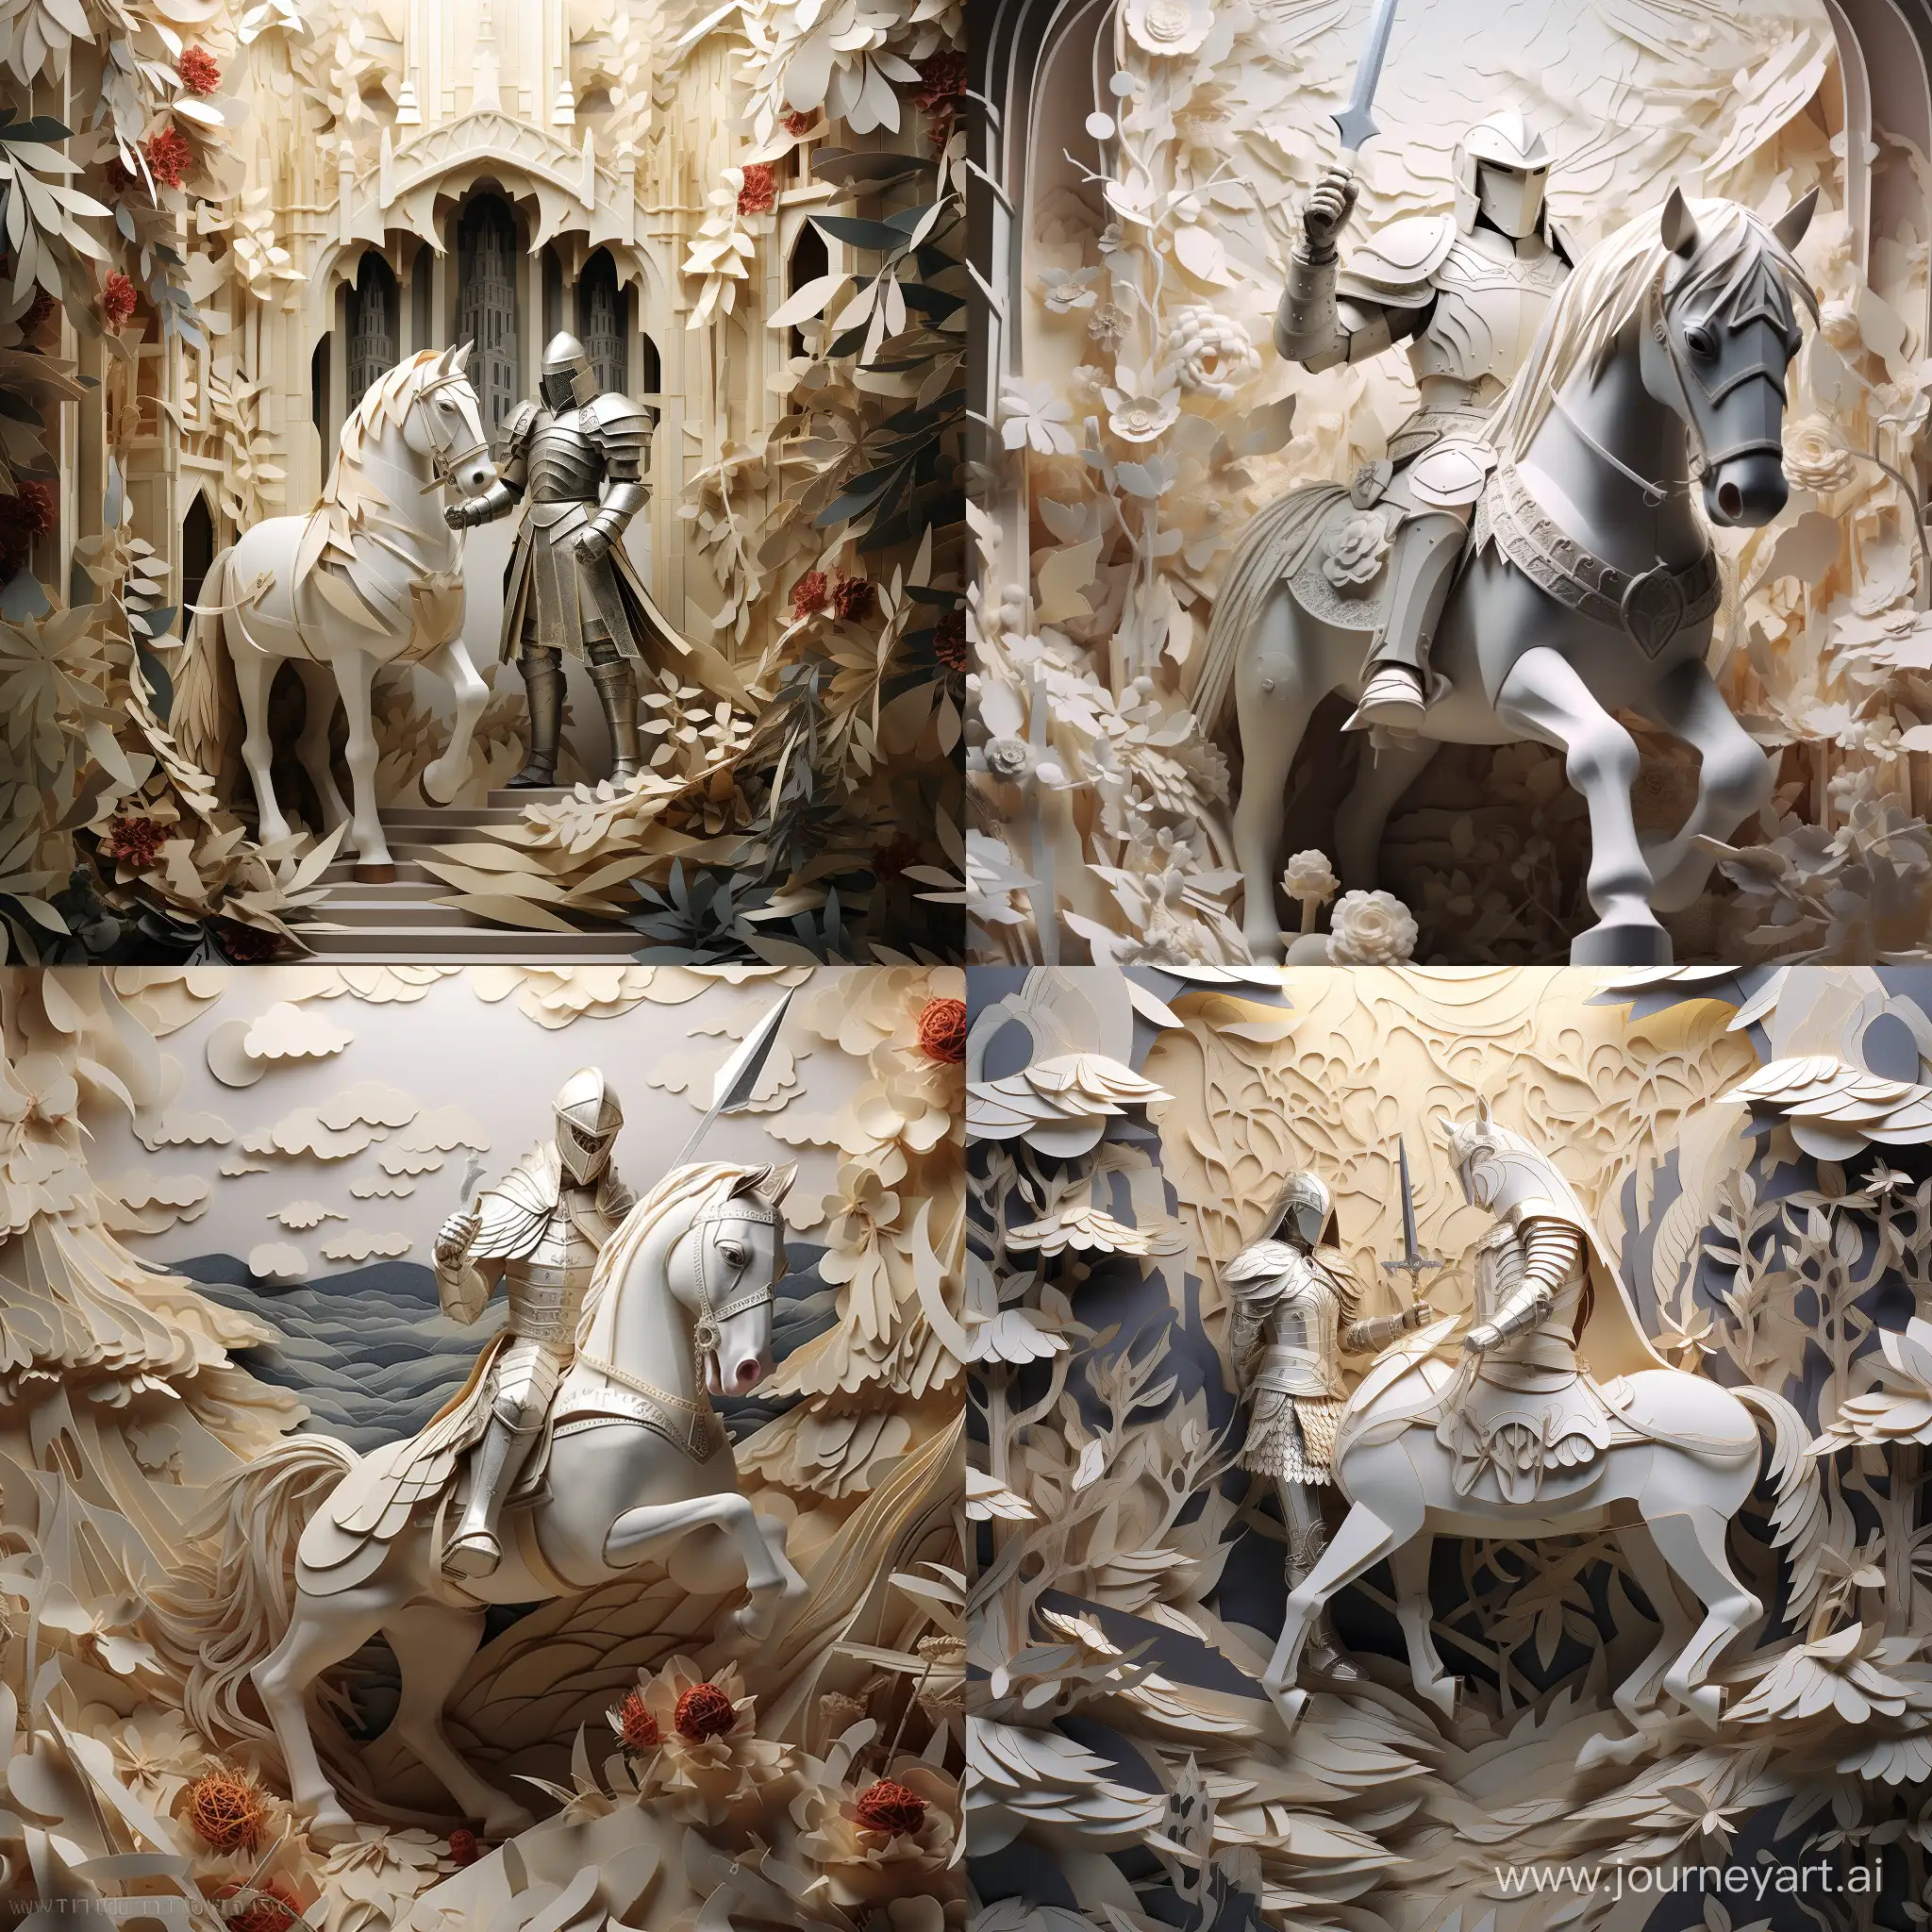 Whimsical-Paper-Art-Diorama-Featuring-White-Knight-11-Scale-No-29712